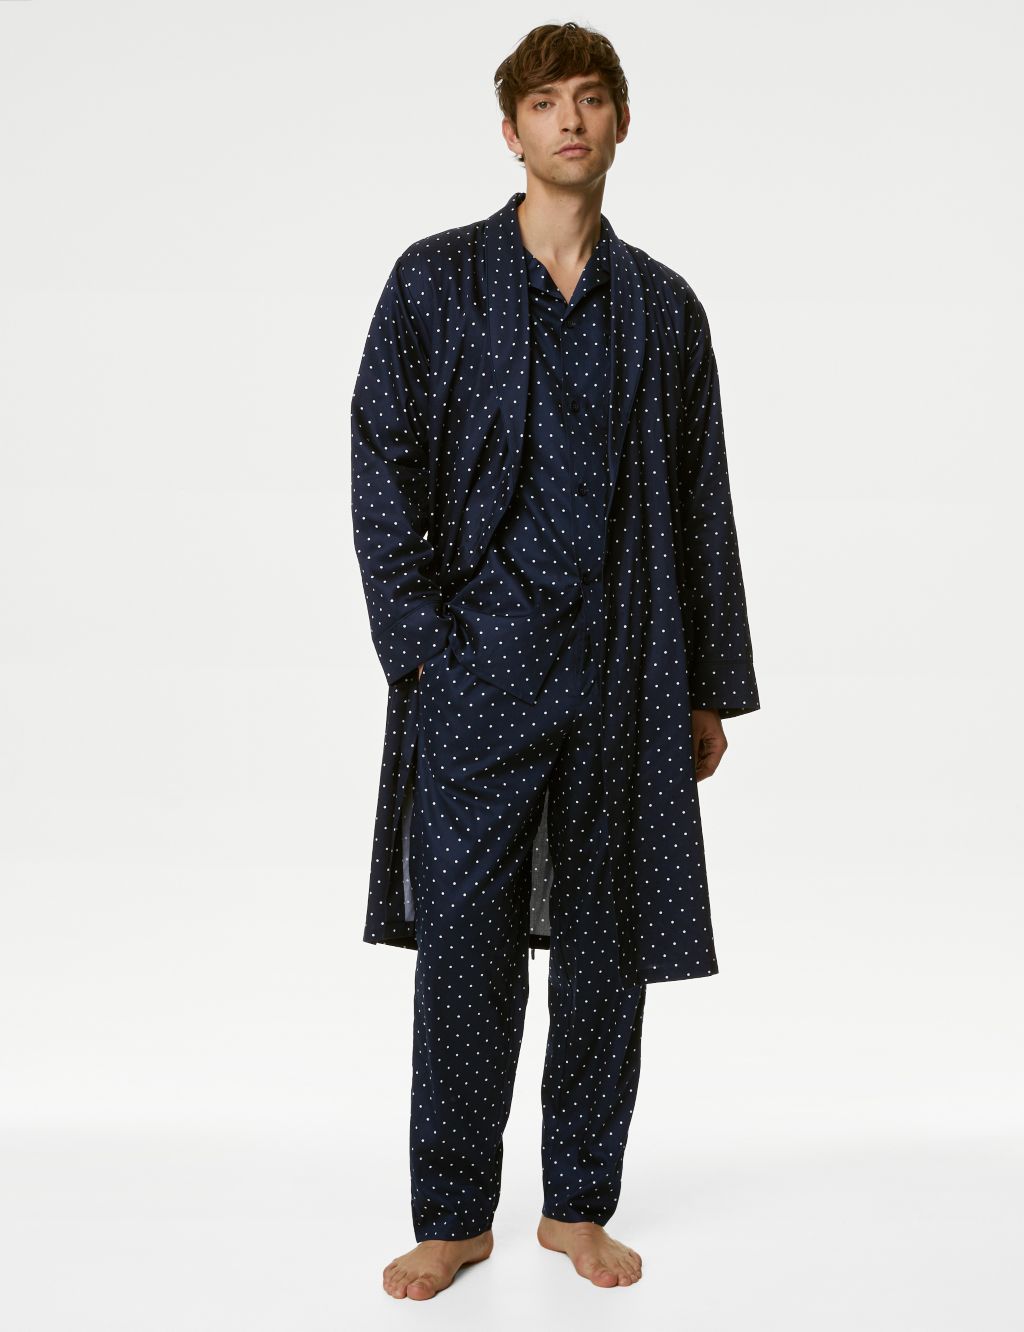 Pure Cotton Polka Dot Dressing Gown image 1